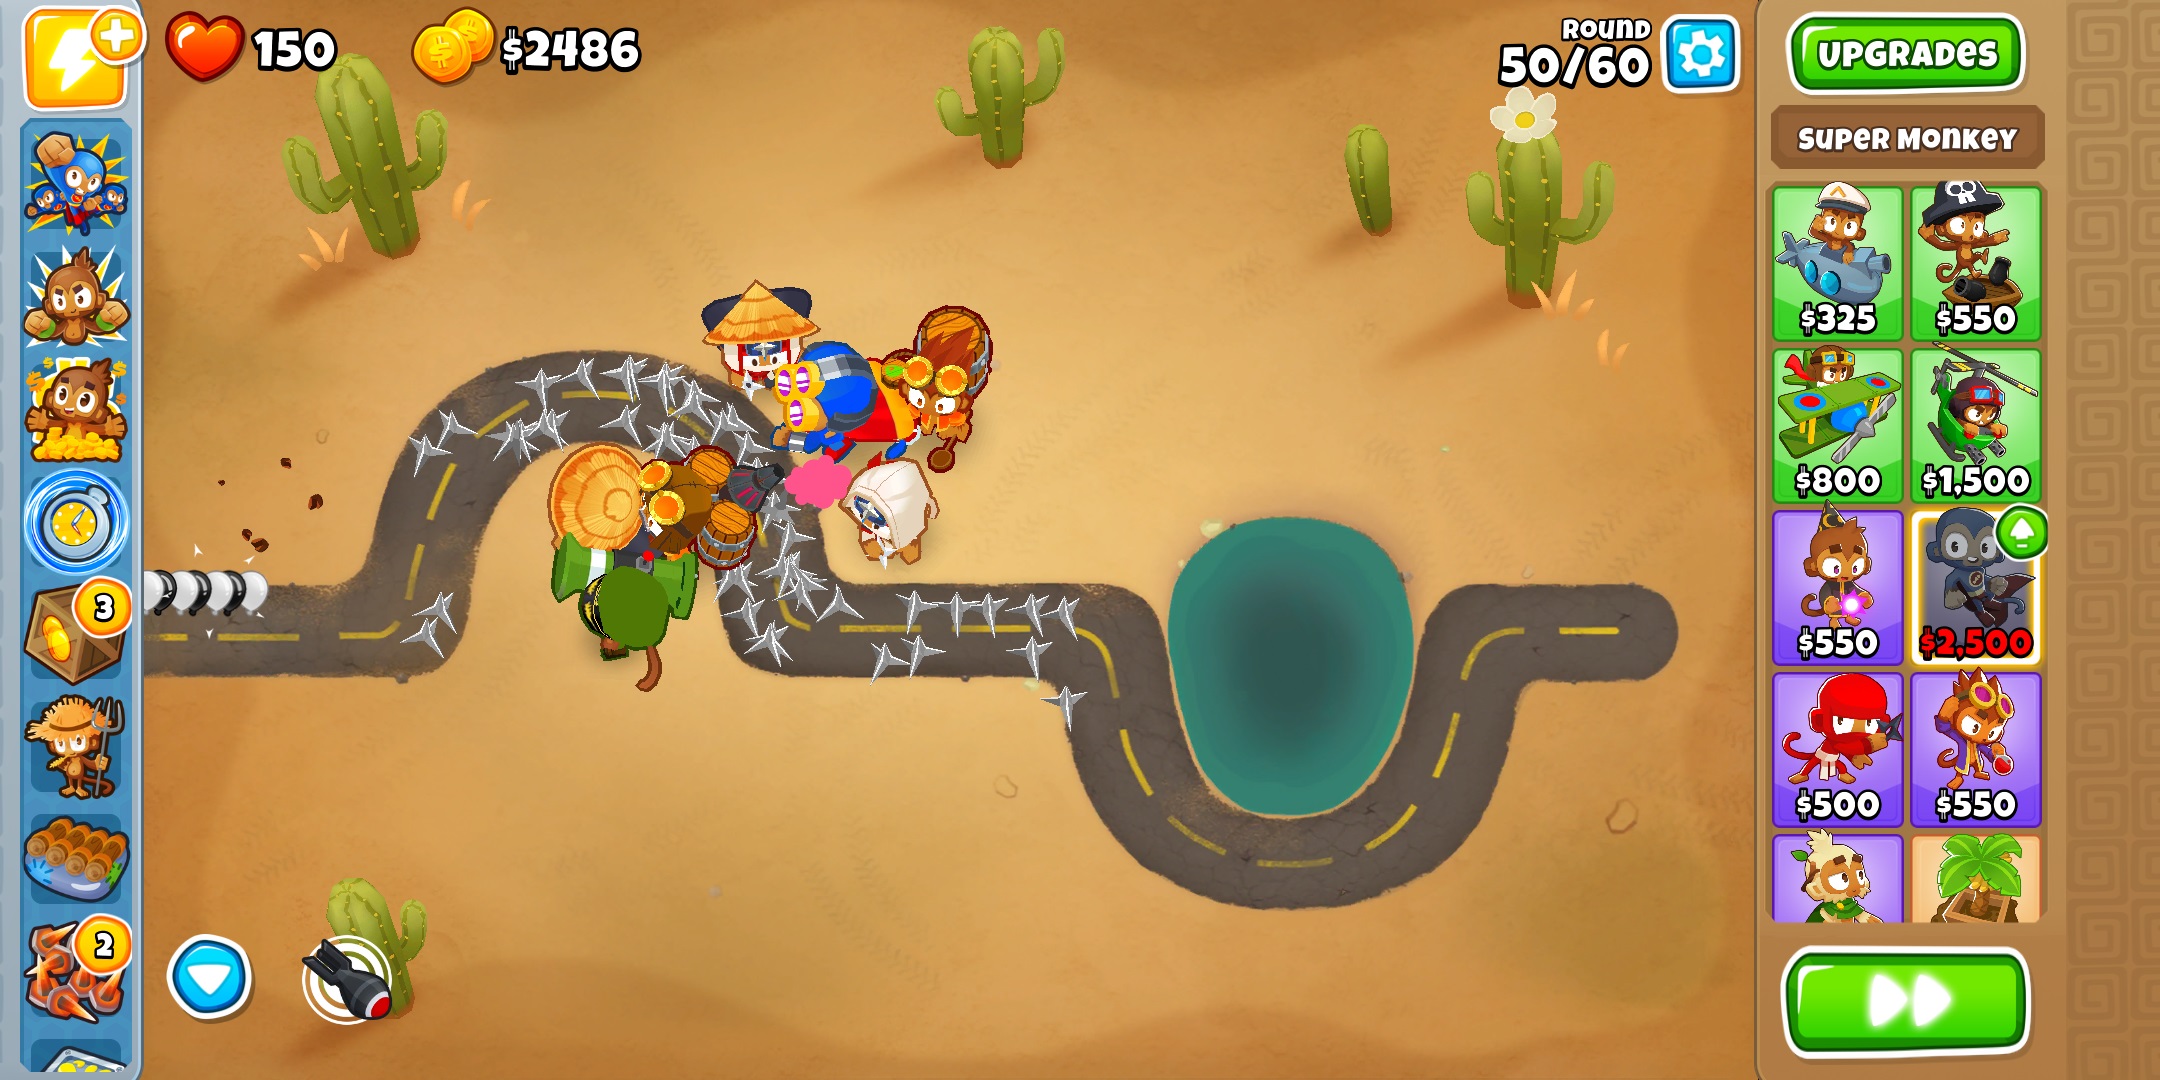 Bloons TD 6 Tips and Tricks Super Monkey